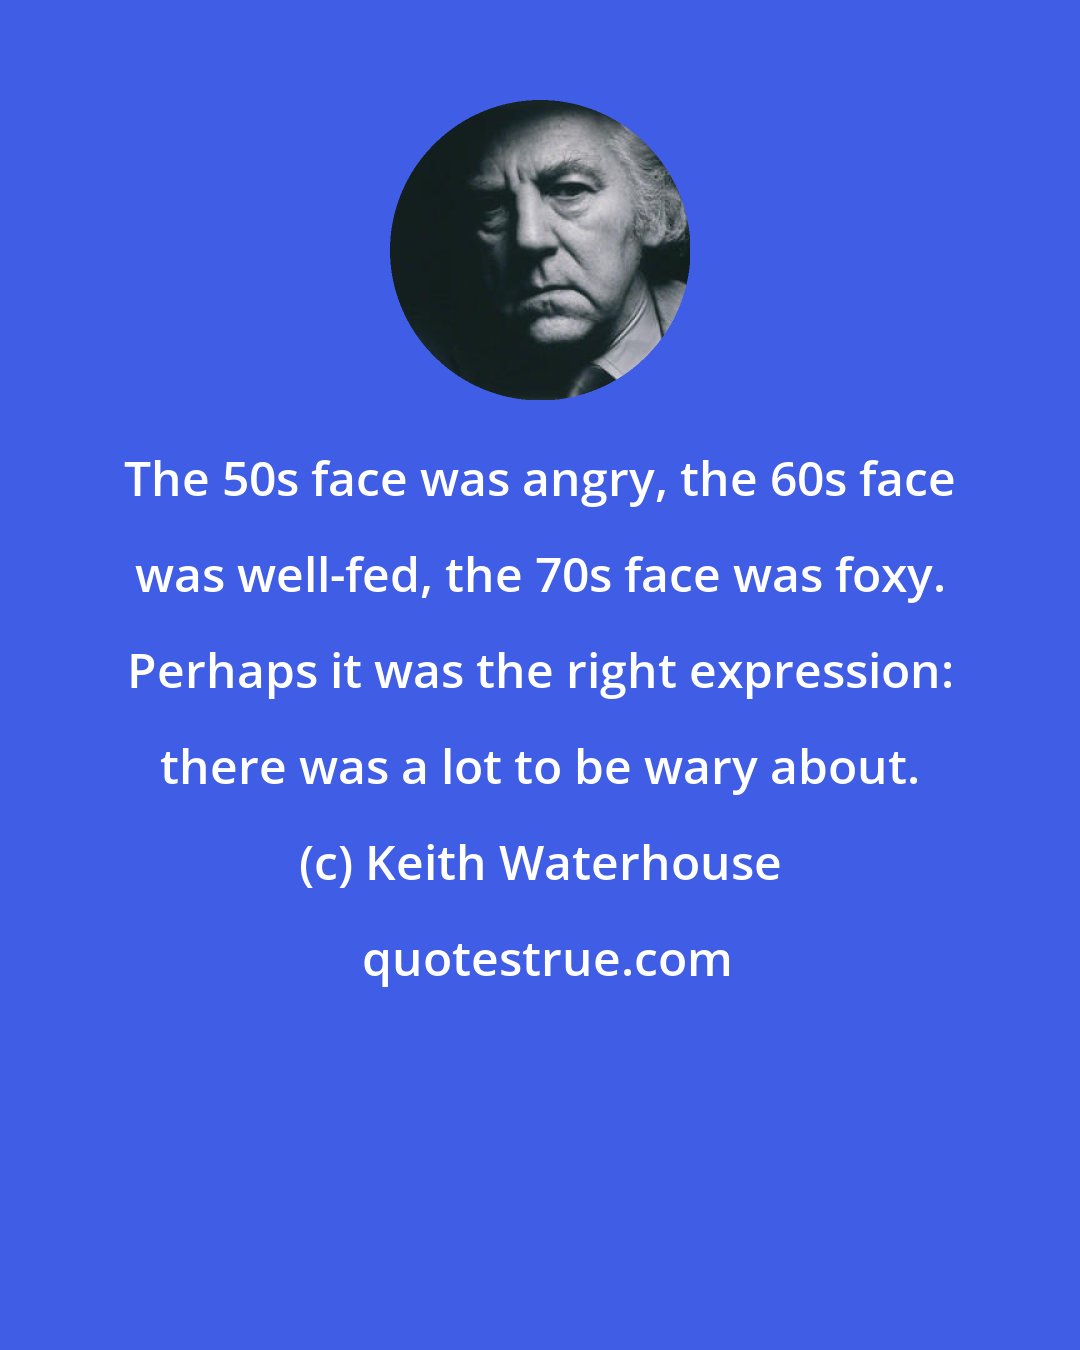 Keith Waterhouse: The 50s face was angry, the 60s face was well-fed, the 70s face was foxy. Perhaps it was the right expression: there was a lot to be wary about.